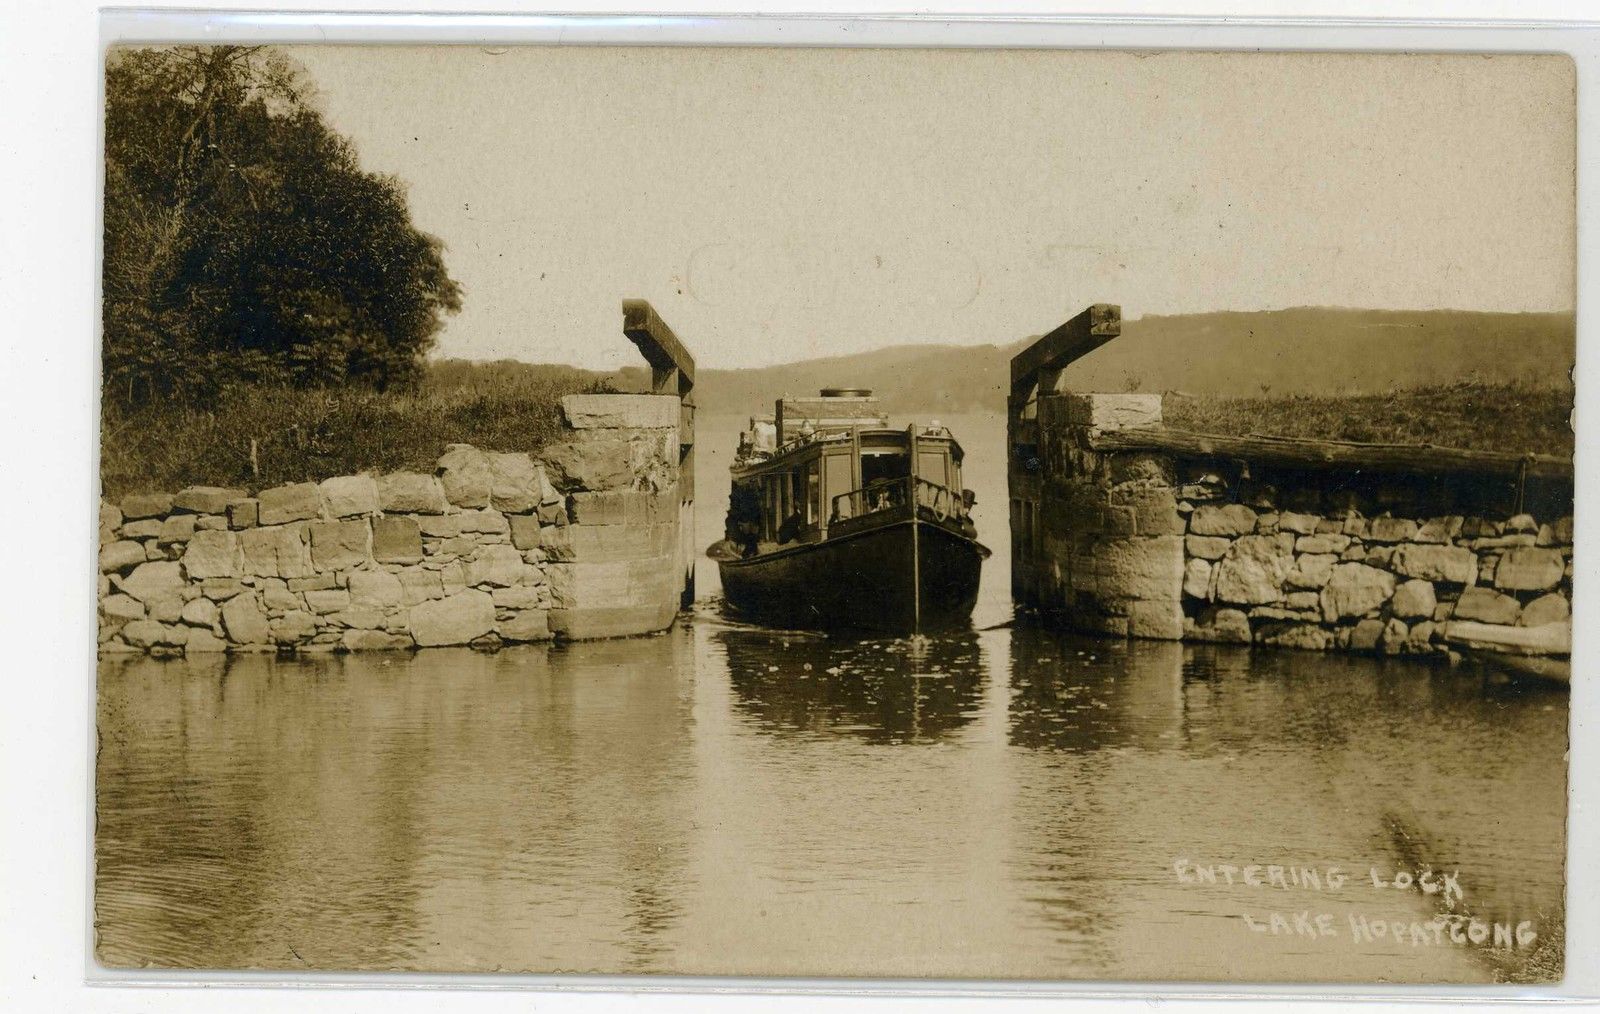 Lake Hopatcong - Canal Boat entering a lock on the Morris Canal - c 1910